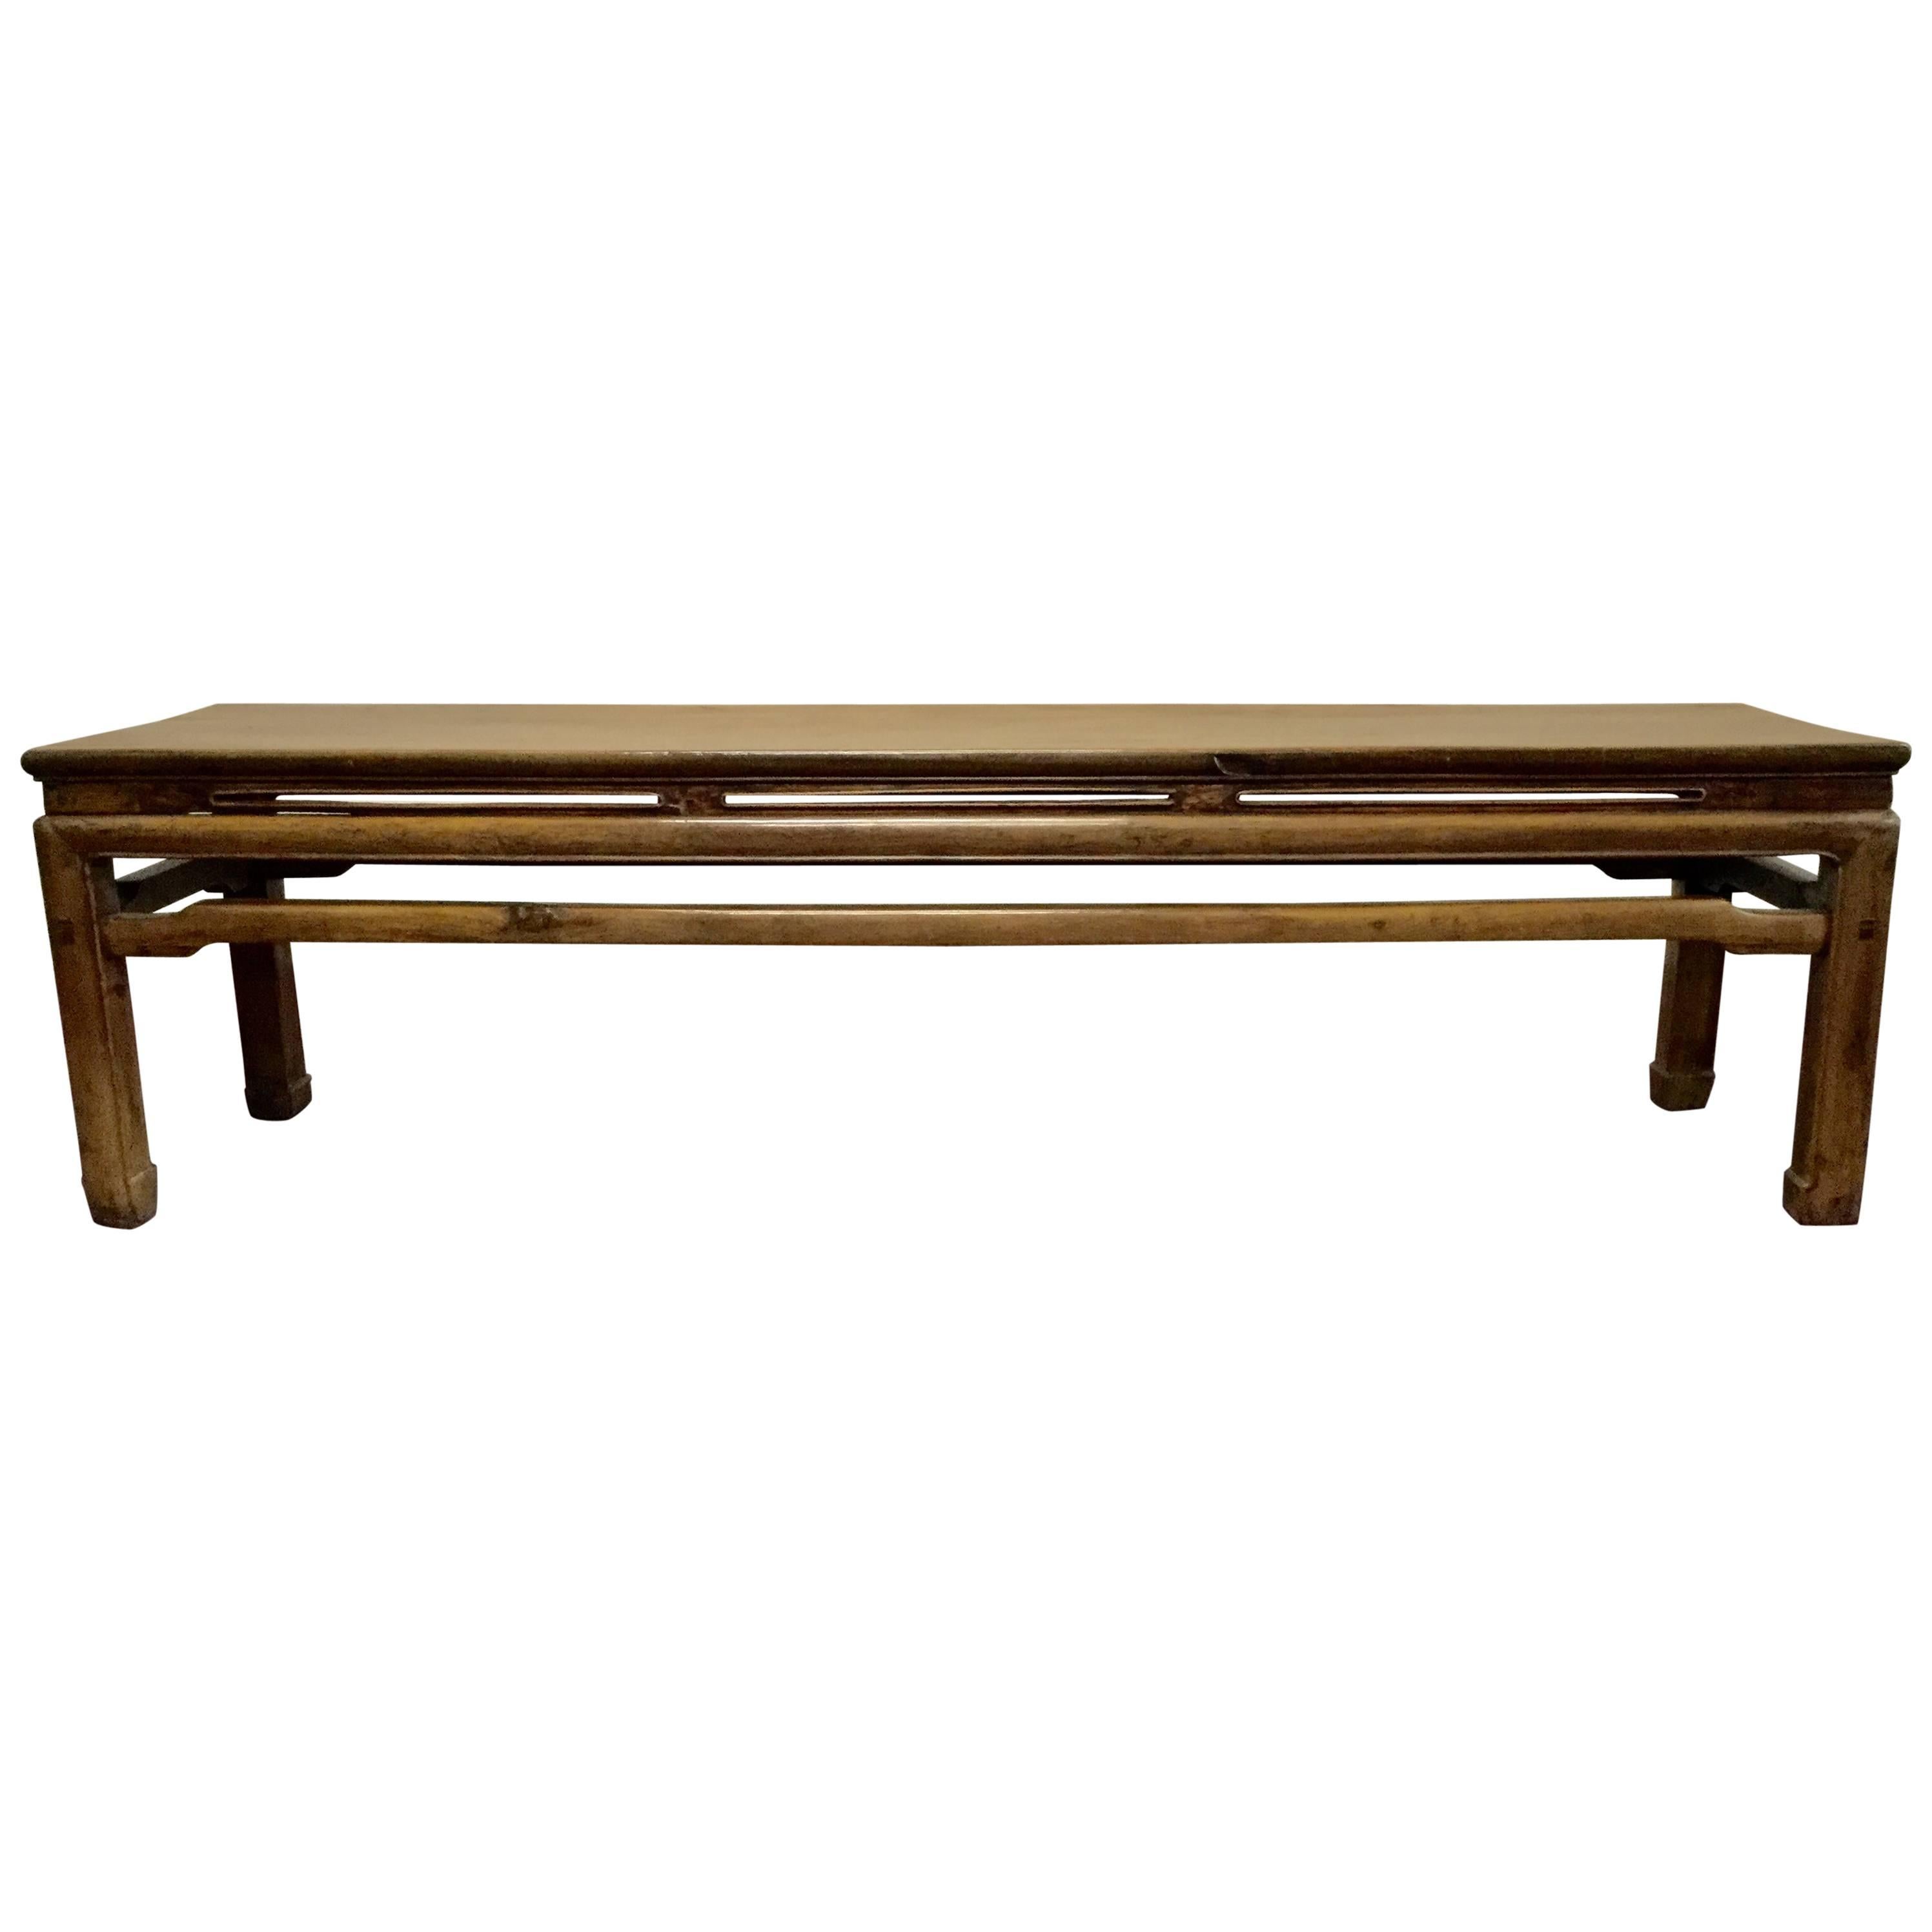 Elegant 19th Century Chinese Bench in the Ming Style